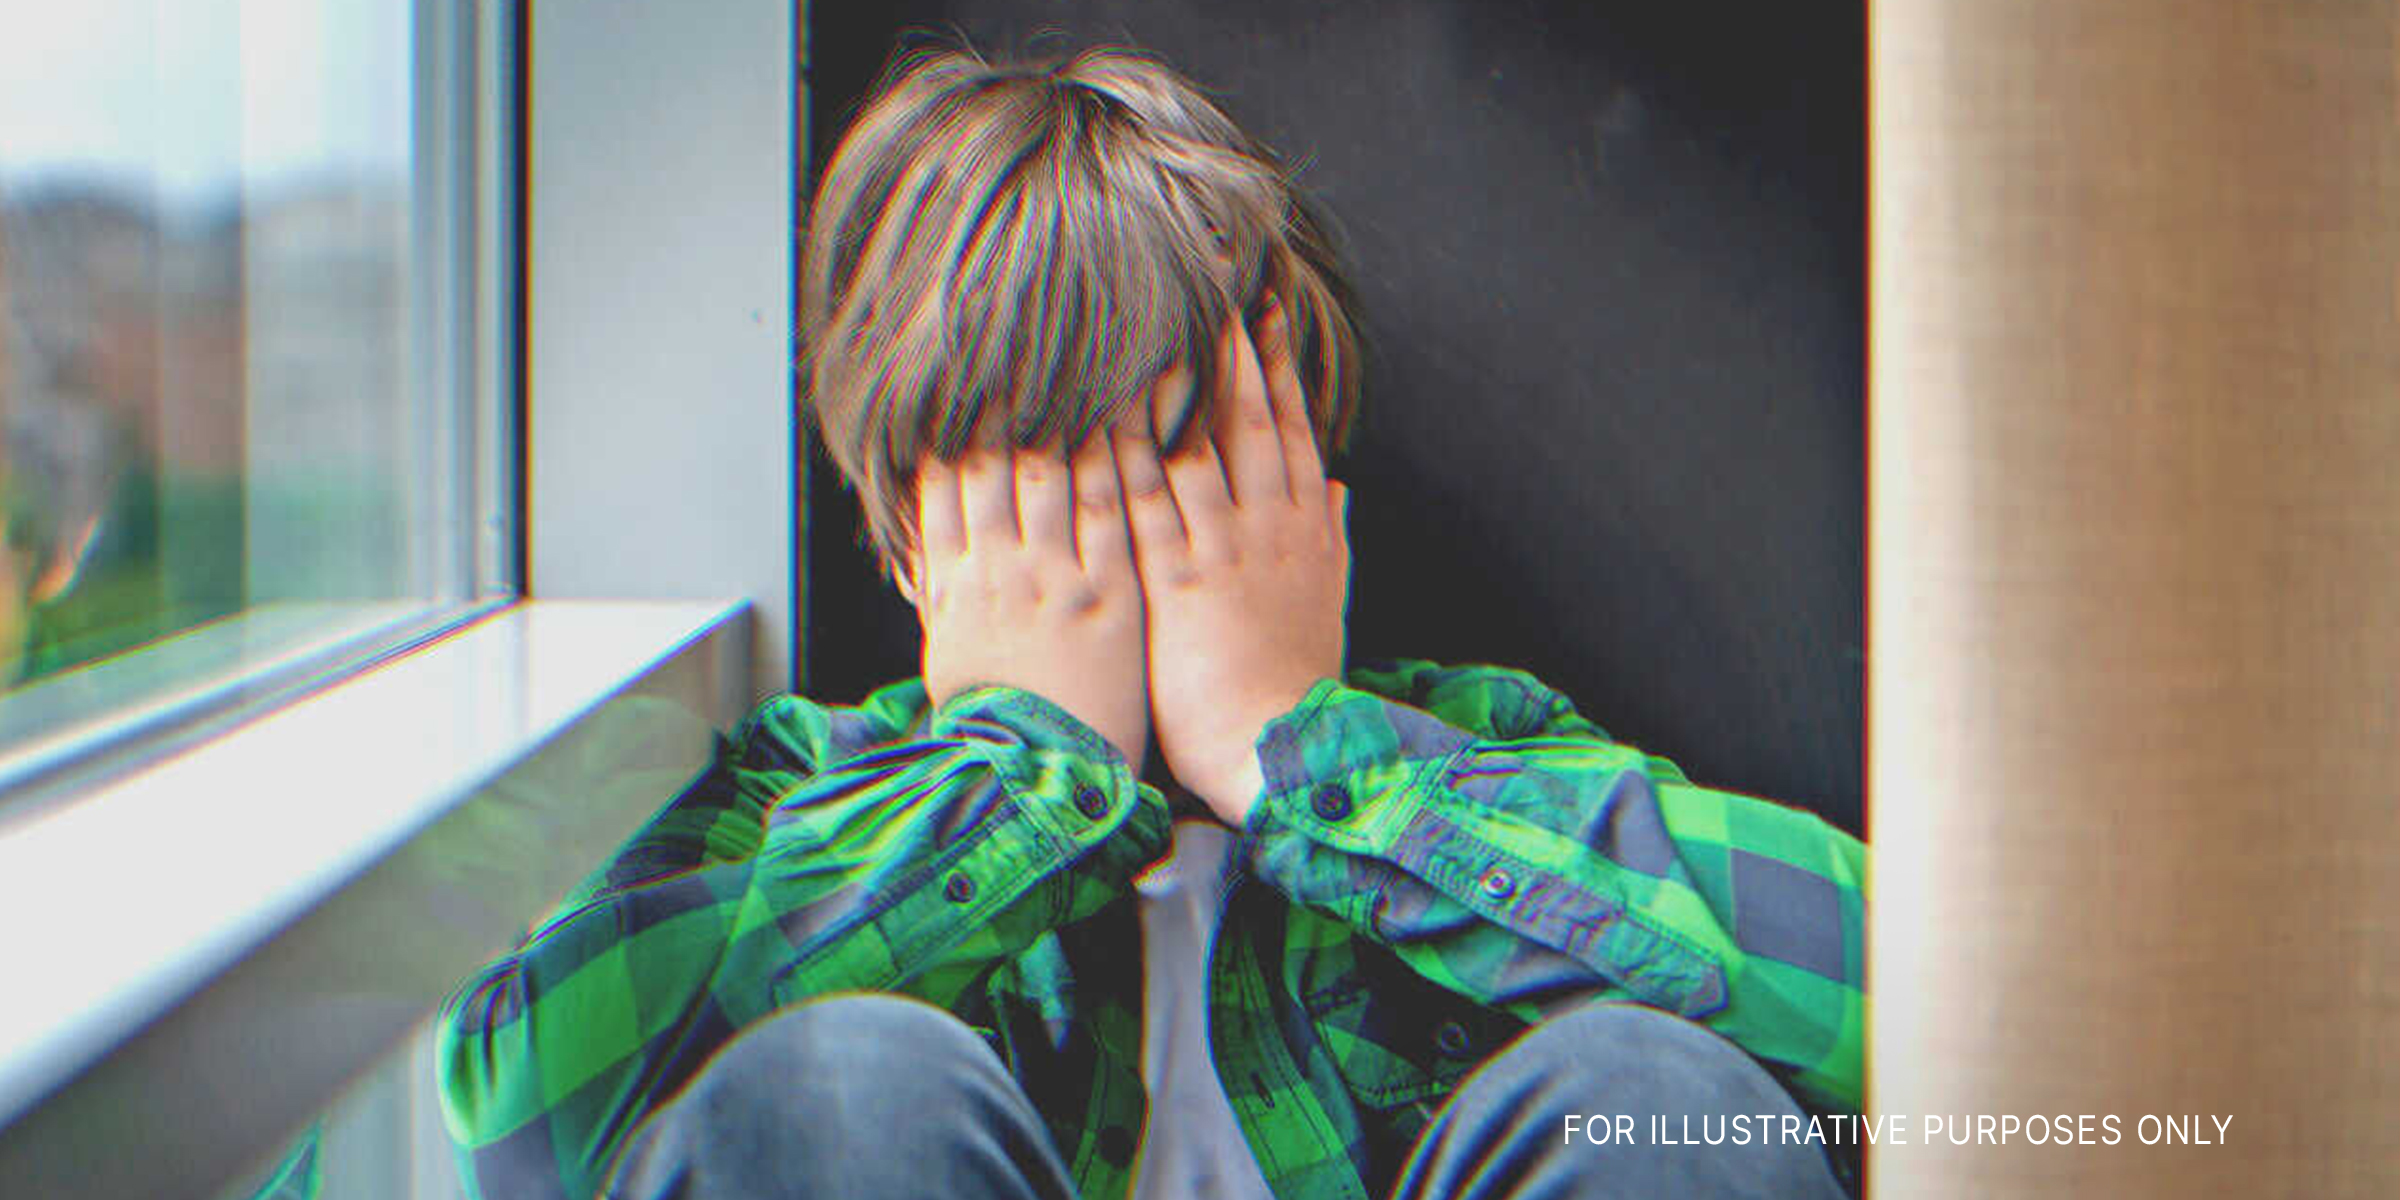 A boy covering his face | Source: Shutterstock